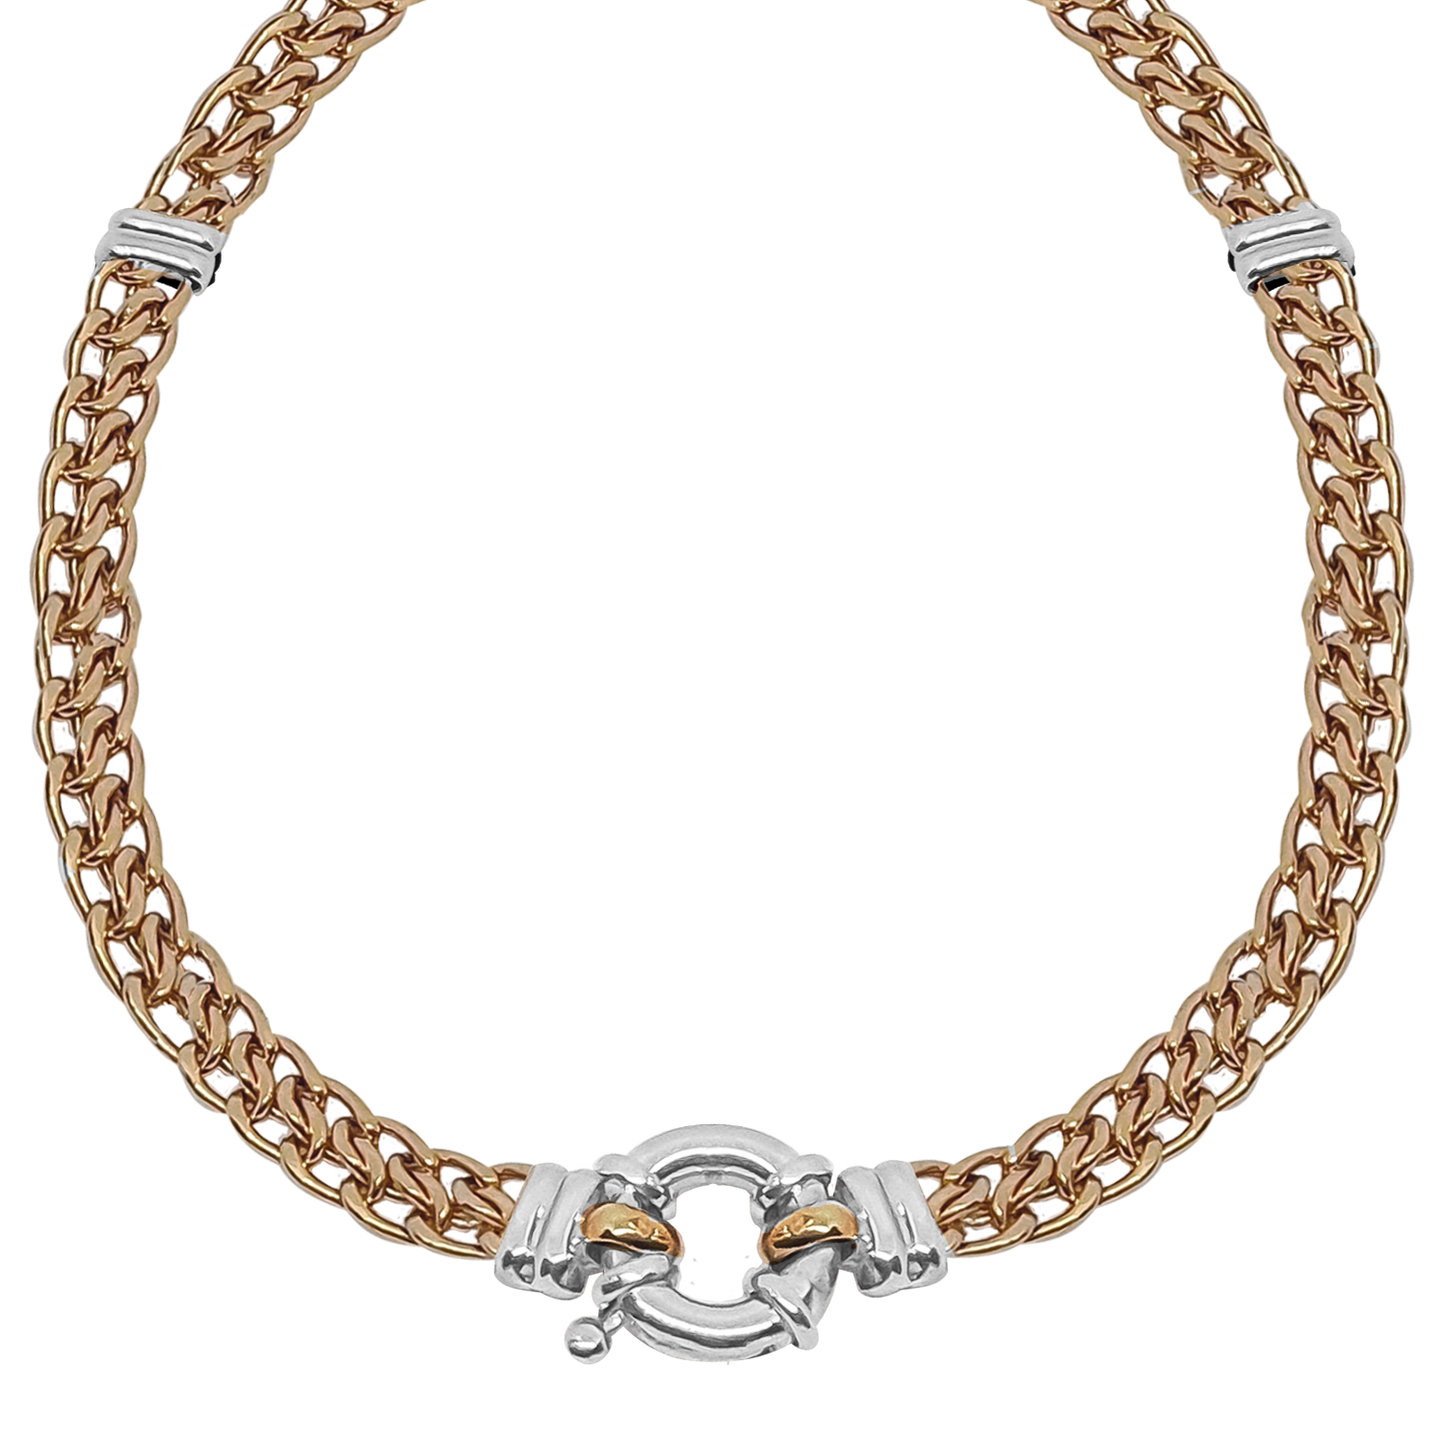 Basket links sequence in 9ct of Rose Gold and four Double Ties in 9ct White Gold in hollow creation for a lighter weight on your shoulders.